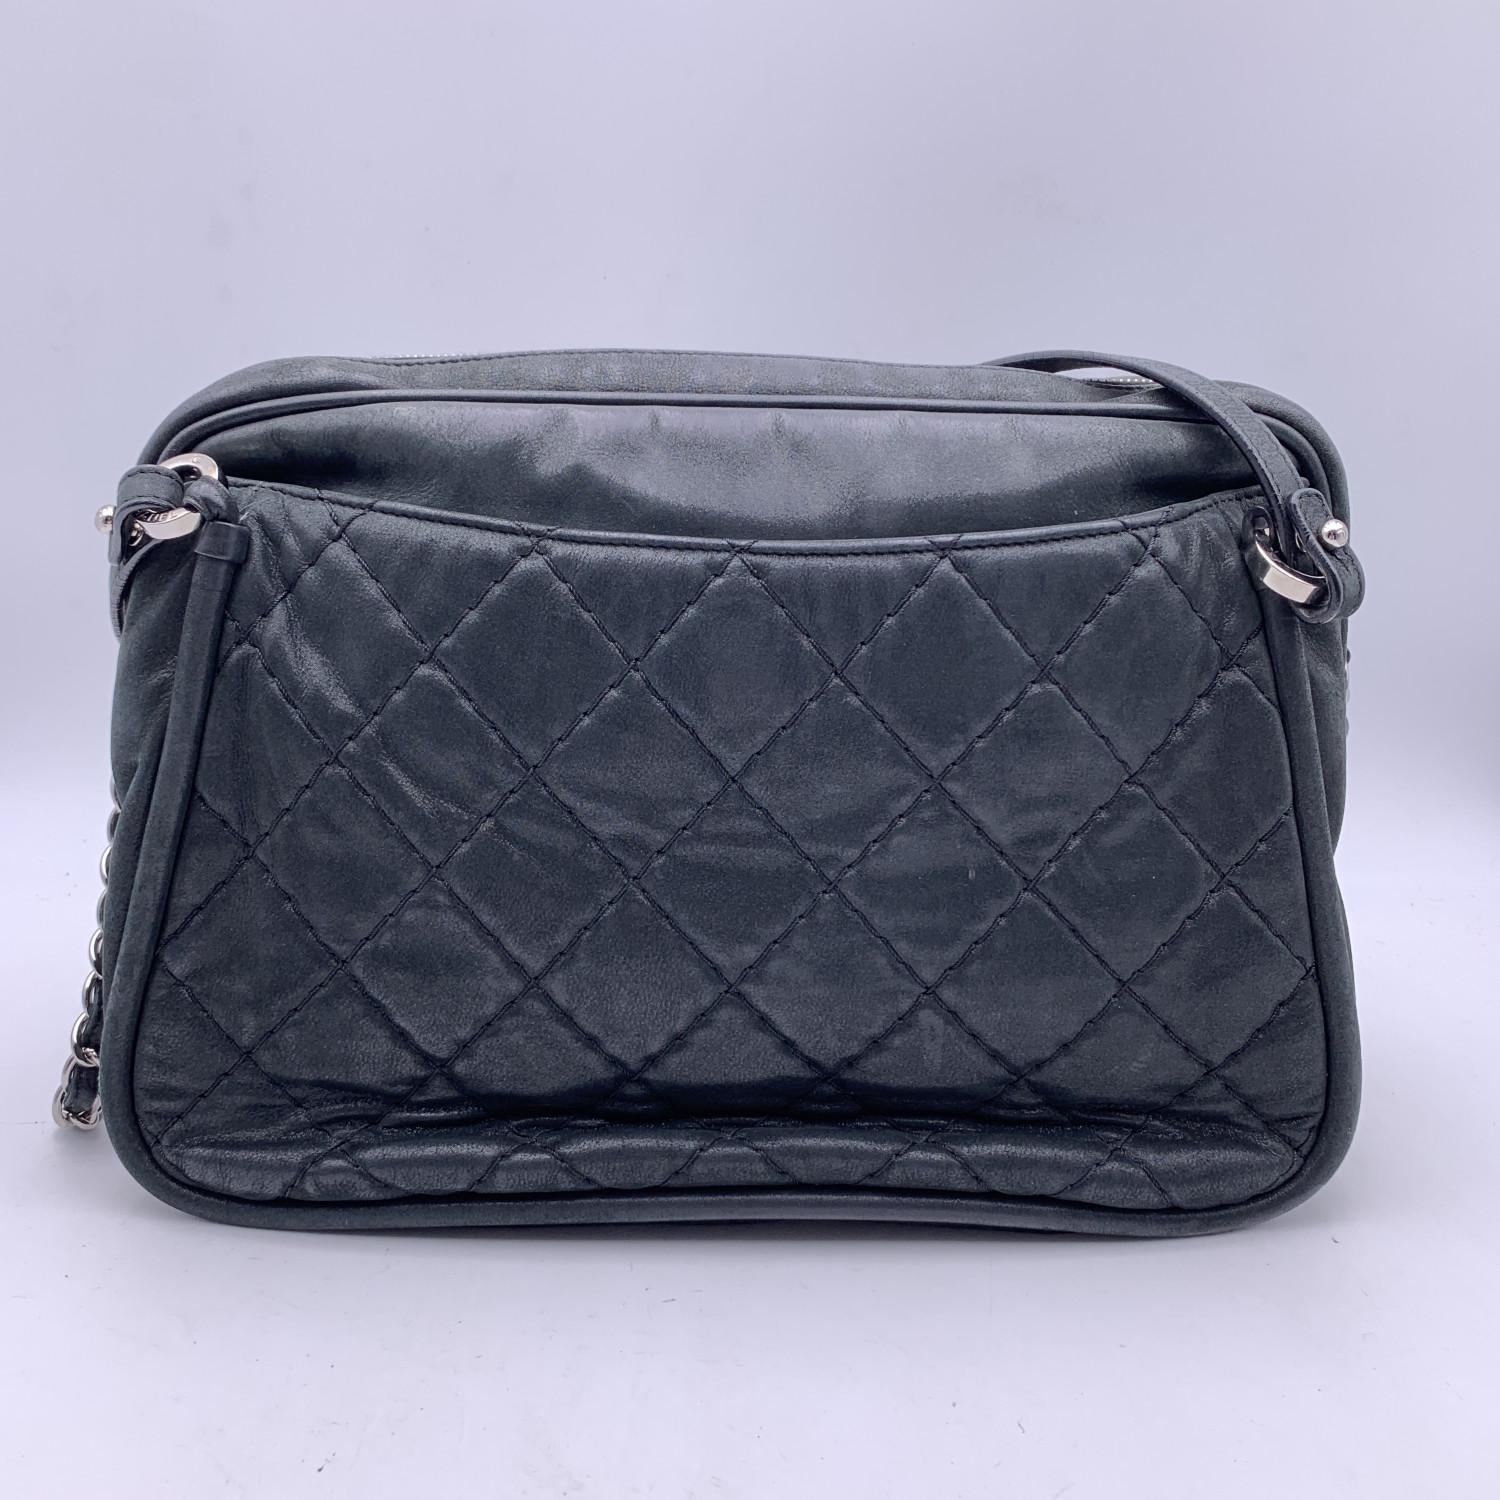 Chanel Black Quilted Leather Relax CC Tote Camera Shoulder Bag For Sale 7